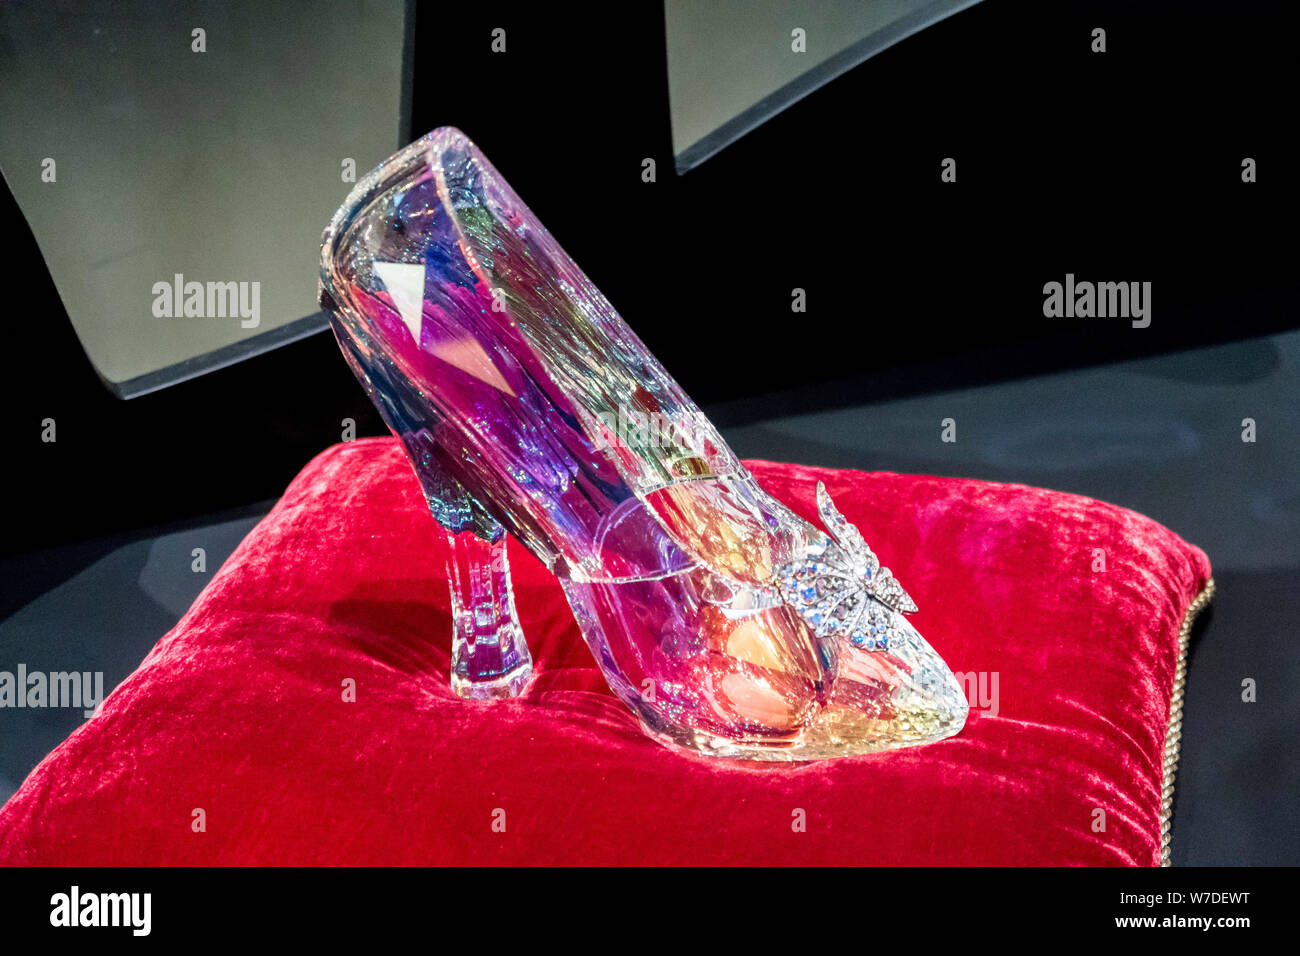 A glass slipper of Cinderella's Shoe is on display duirng the